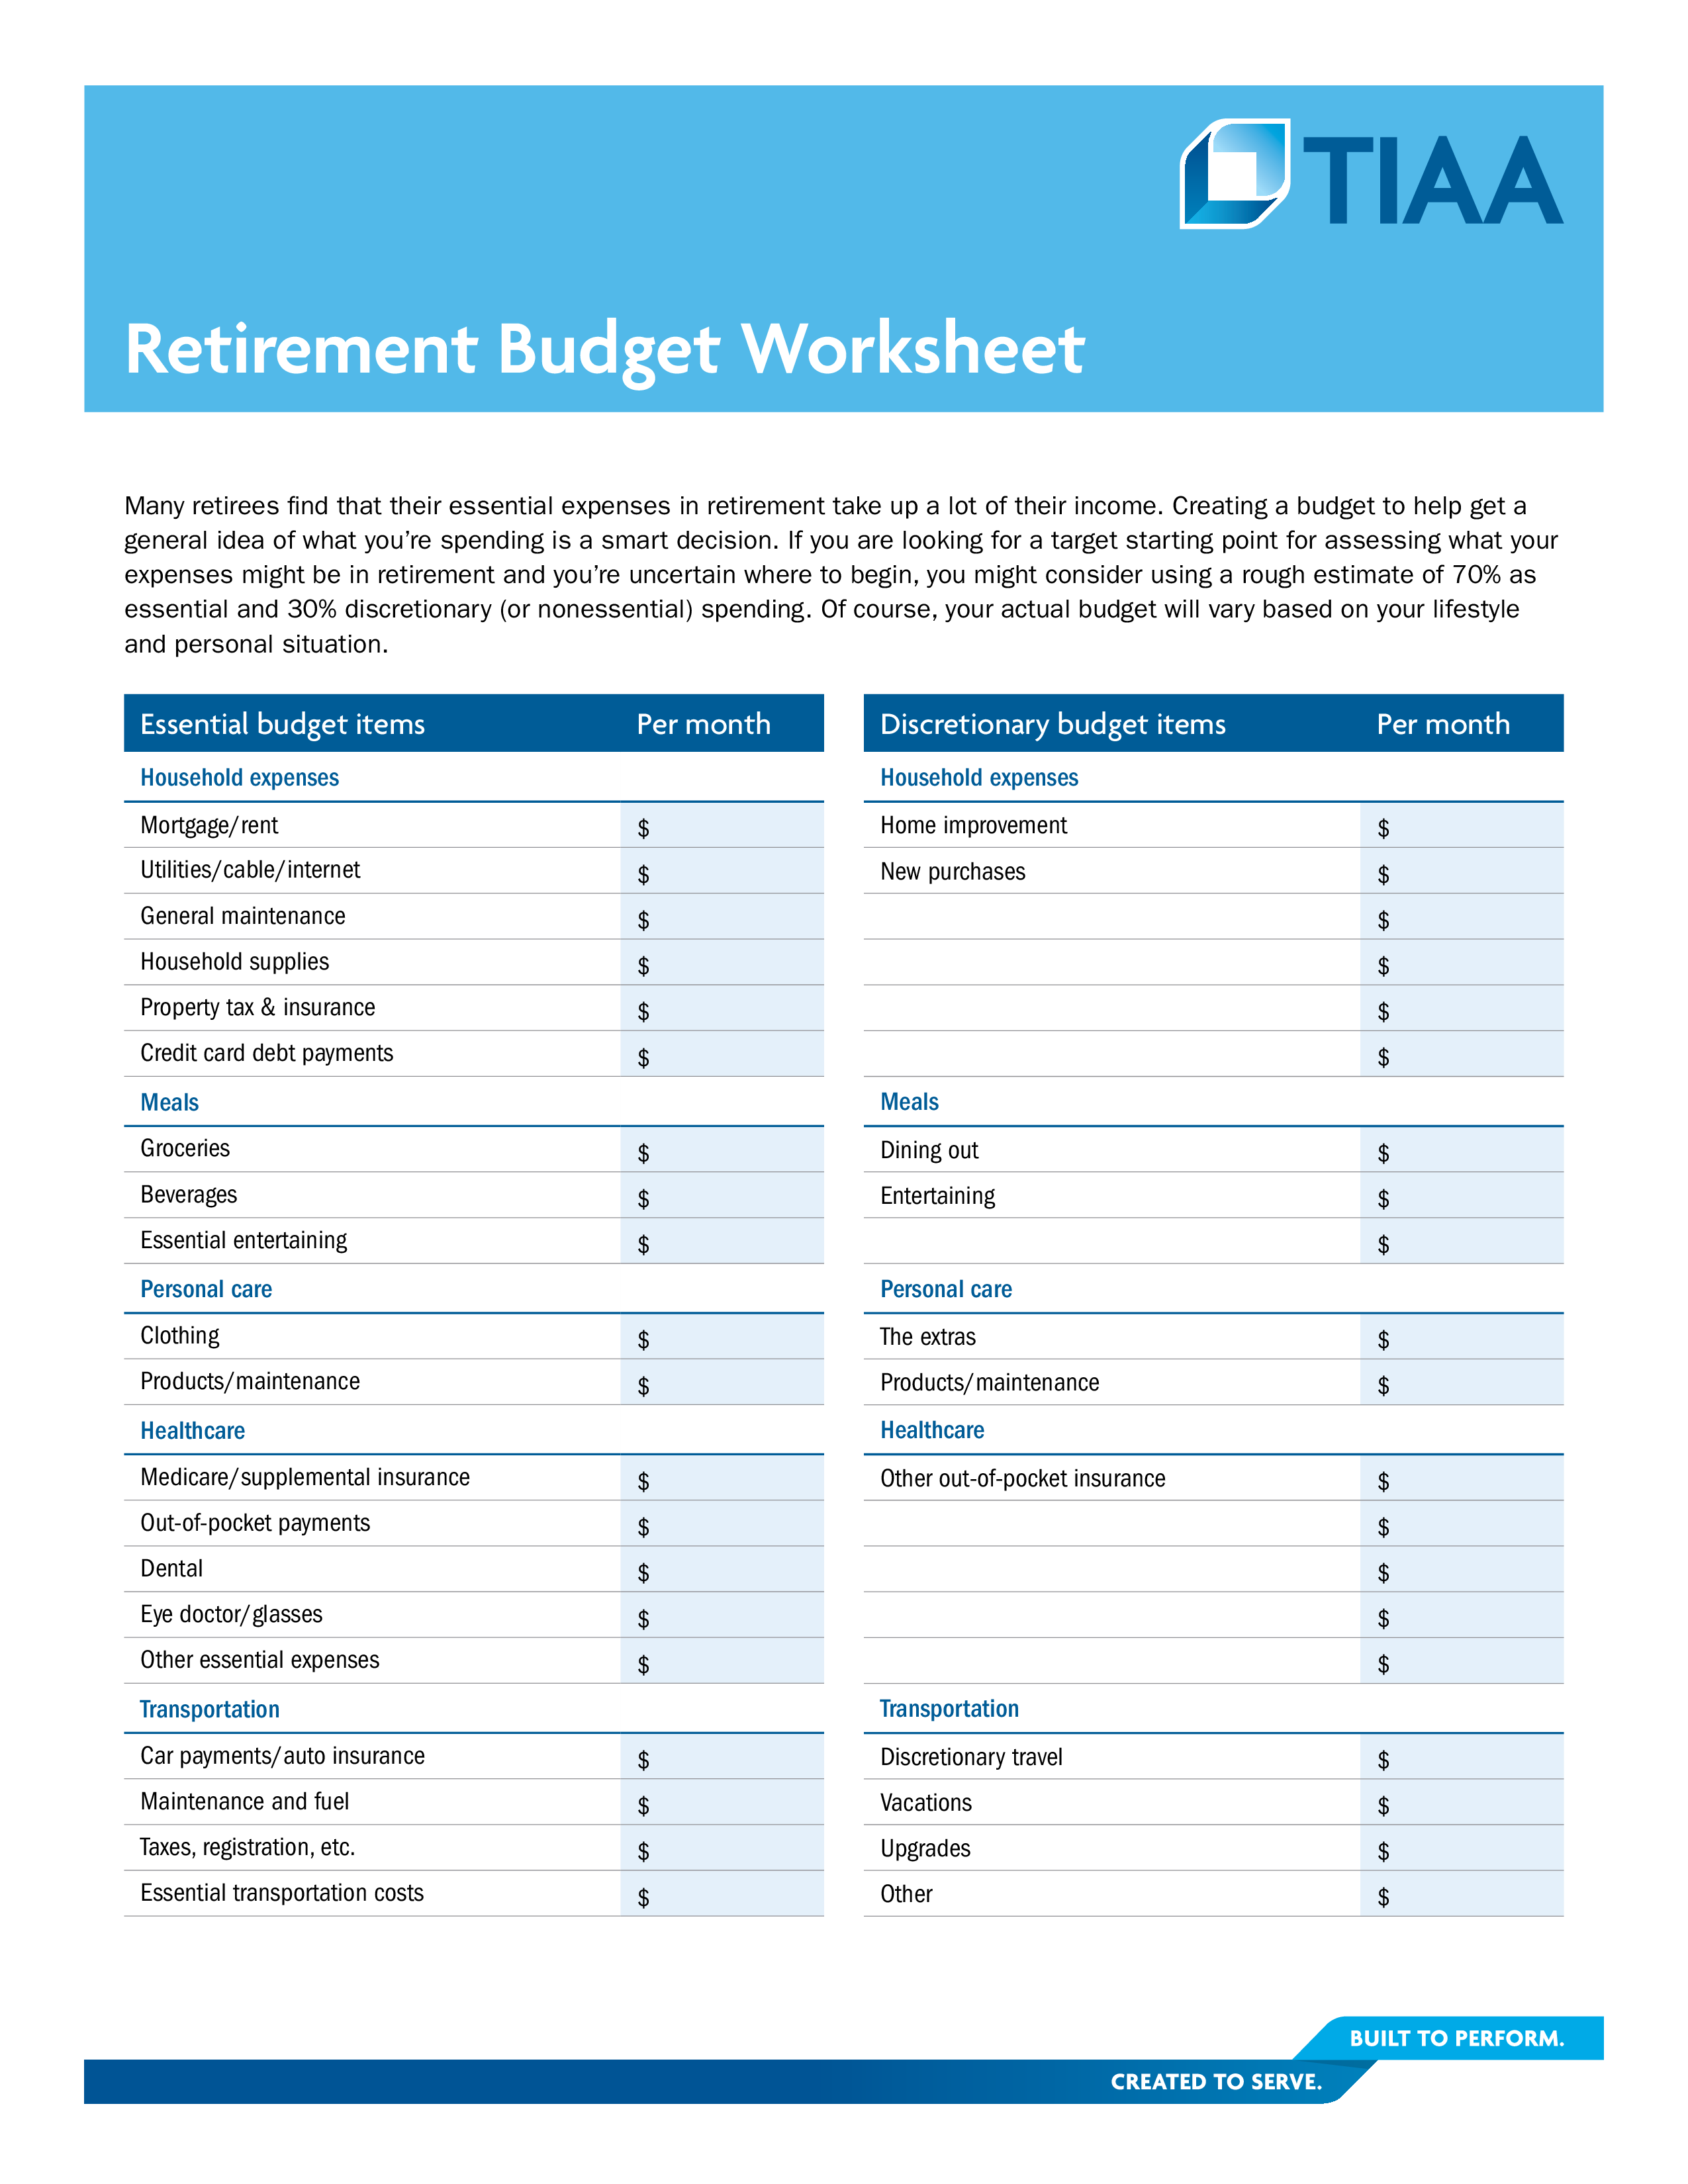 recommended category percentage of household retirement budget